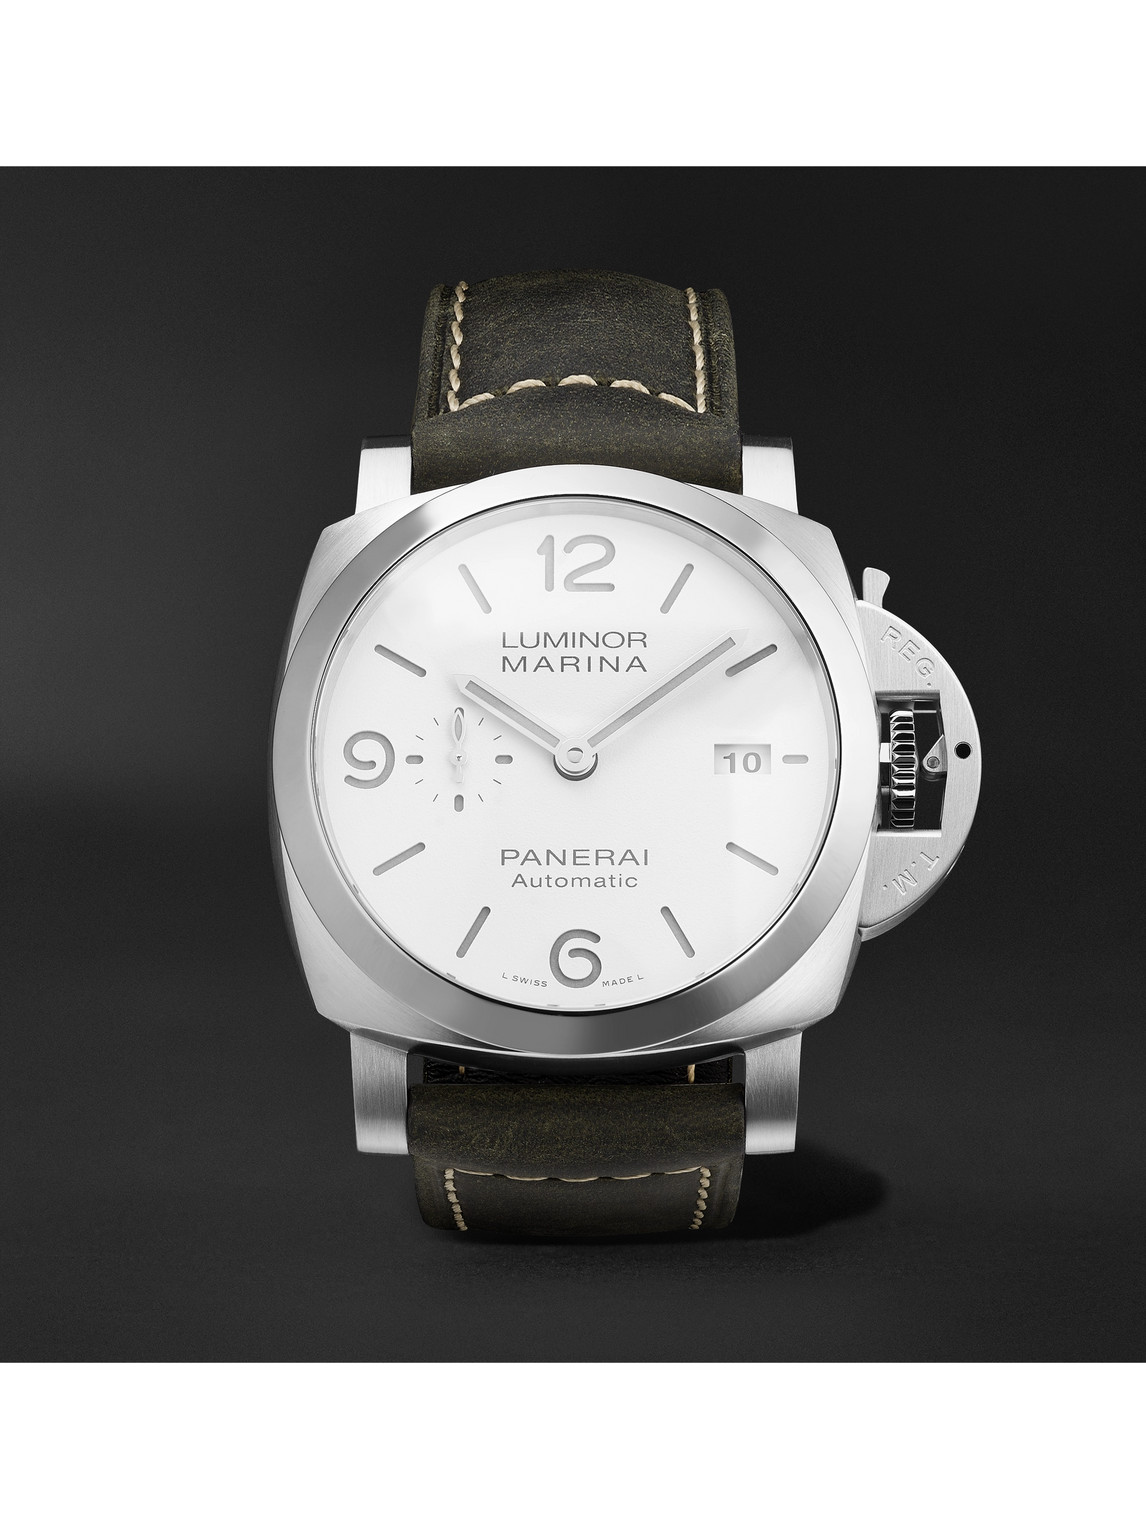 Luminor Marina Automatic 44mm Stainless Steel and Leather Watch, Ref. No. PAM01314